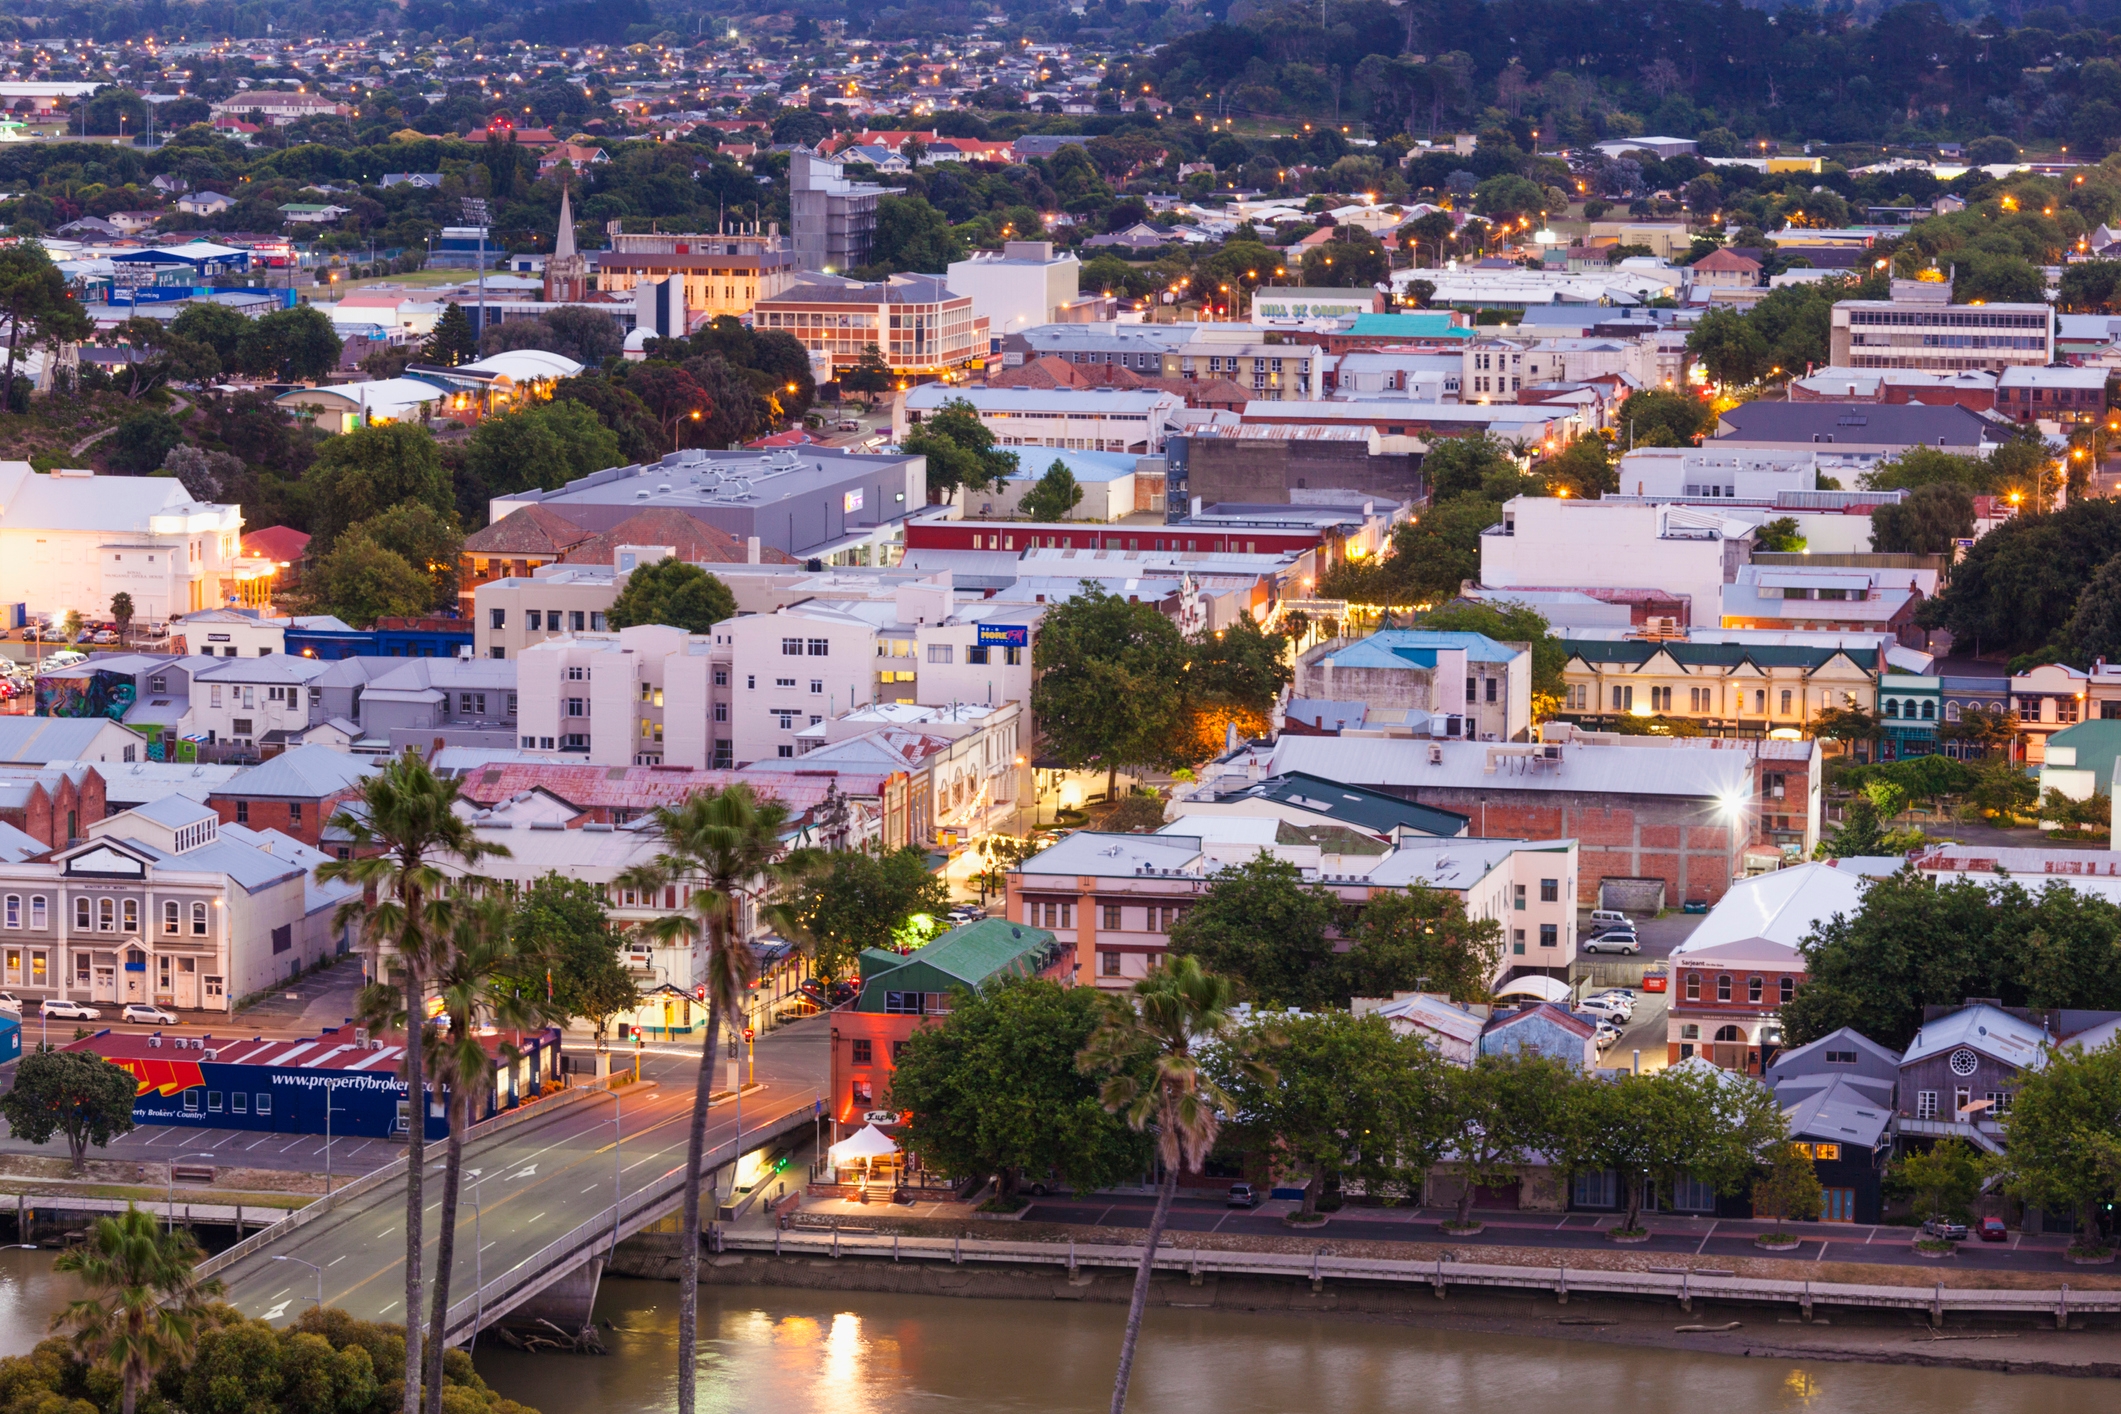 The city of Whanganui, shown at dusk, increasingly being recognised as a great place to work and live